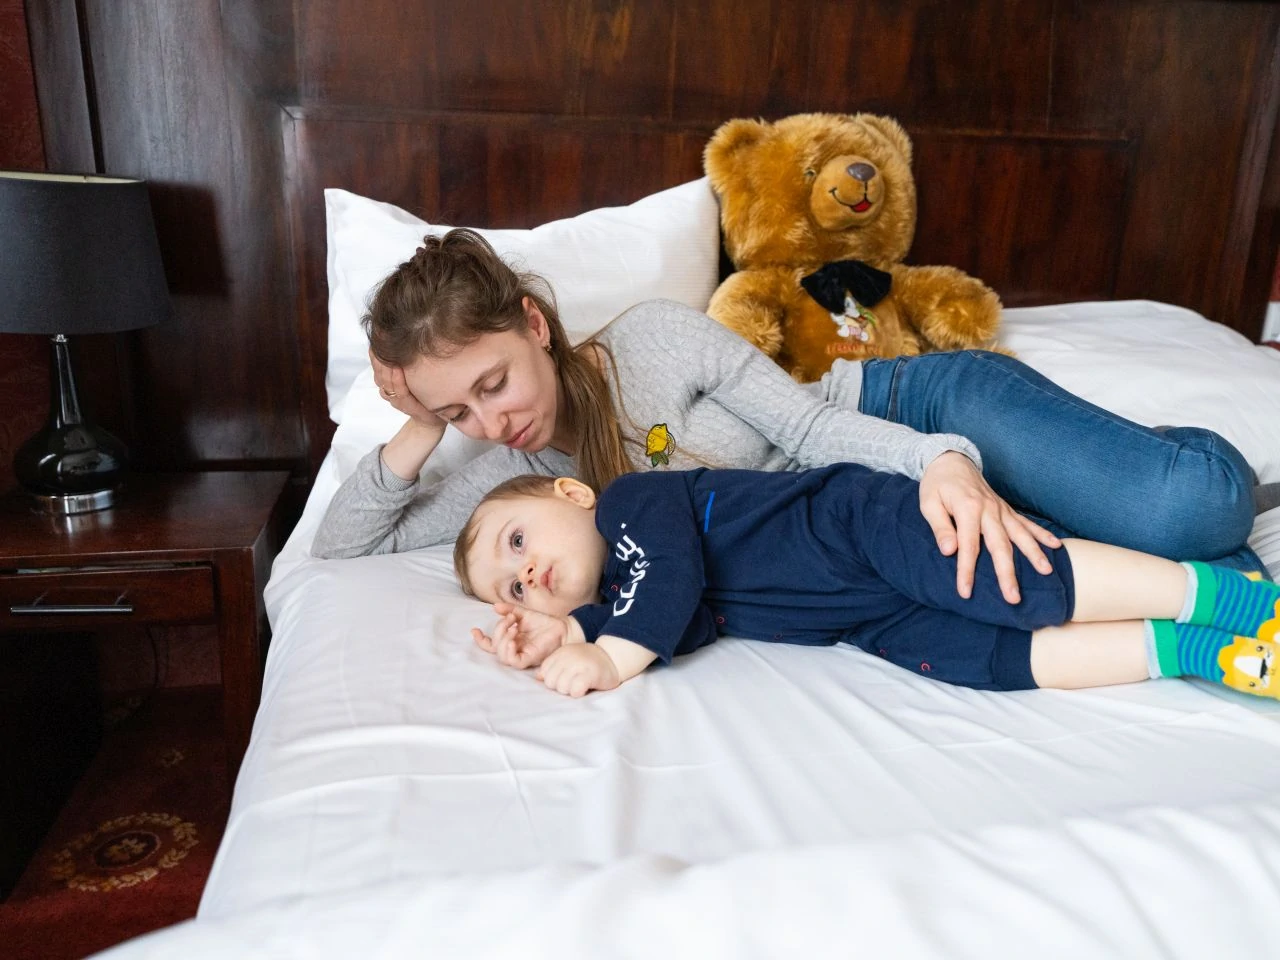 Alina poses for a photo with her son, Timofy, with his new stuffed bear on a bed in a hotel in Krakow, Poland